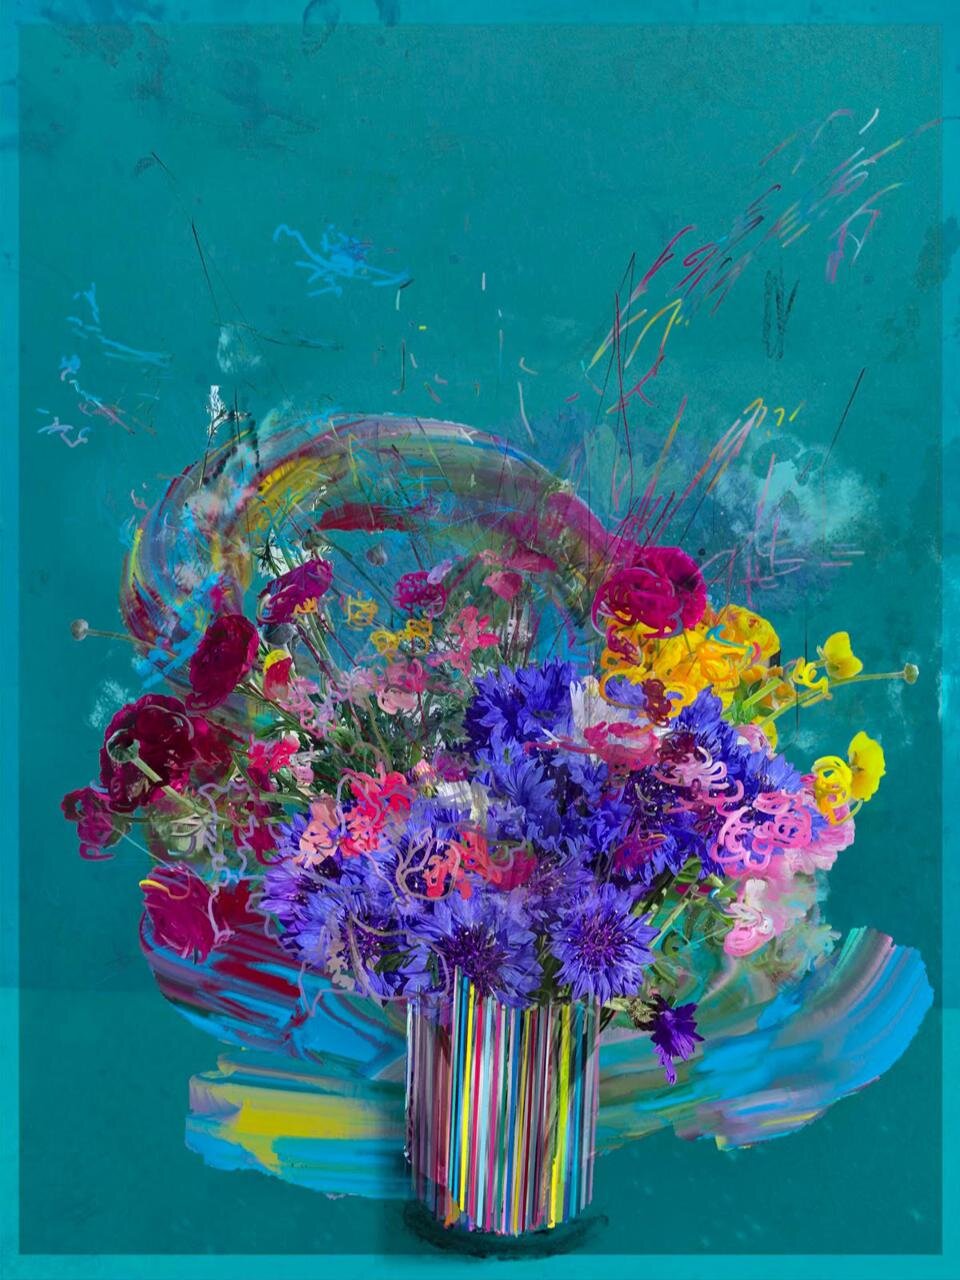 PC Flower Vase 001 by Petra Cortright, sold on Superrare platform